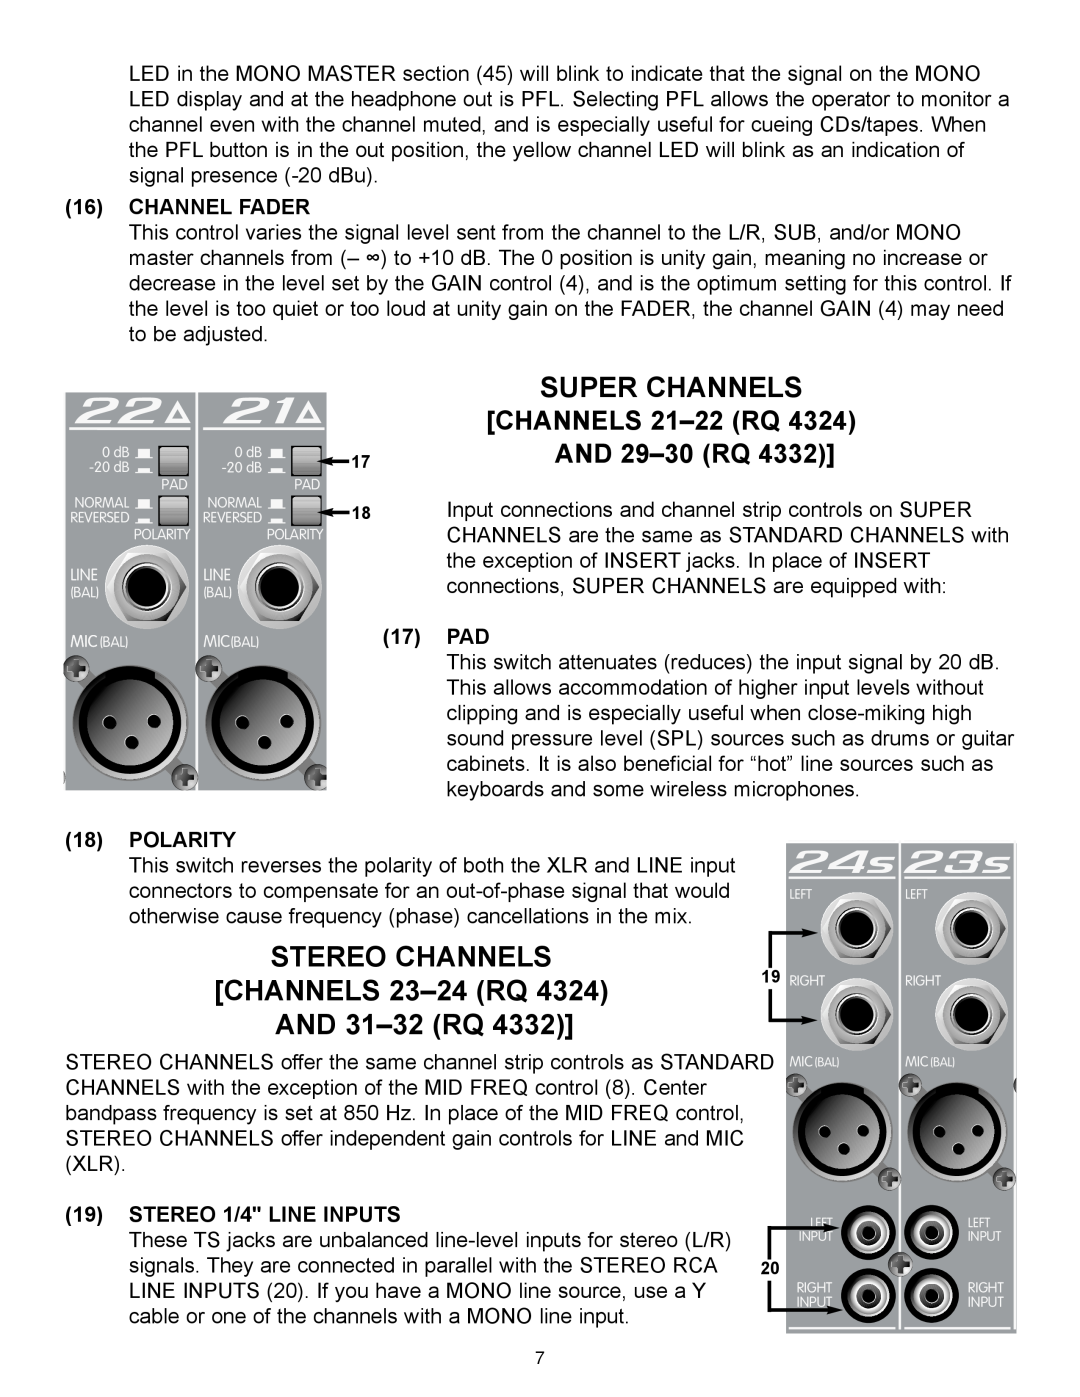 Peavey RQ 4300 Series Super Channels, Stereo Channels, CHANNELS 23-24 RQ, AND 31-32 RQ, Channel Fader, 17 PAD, Polarity 